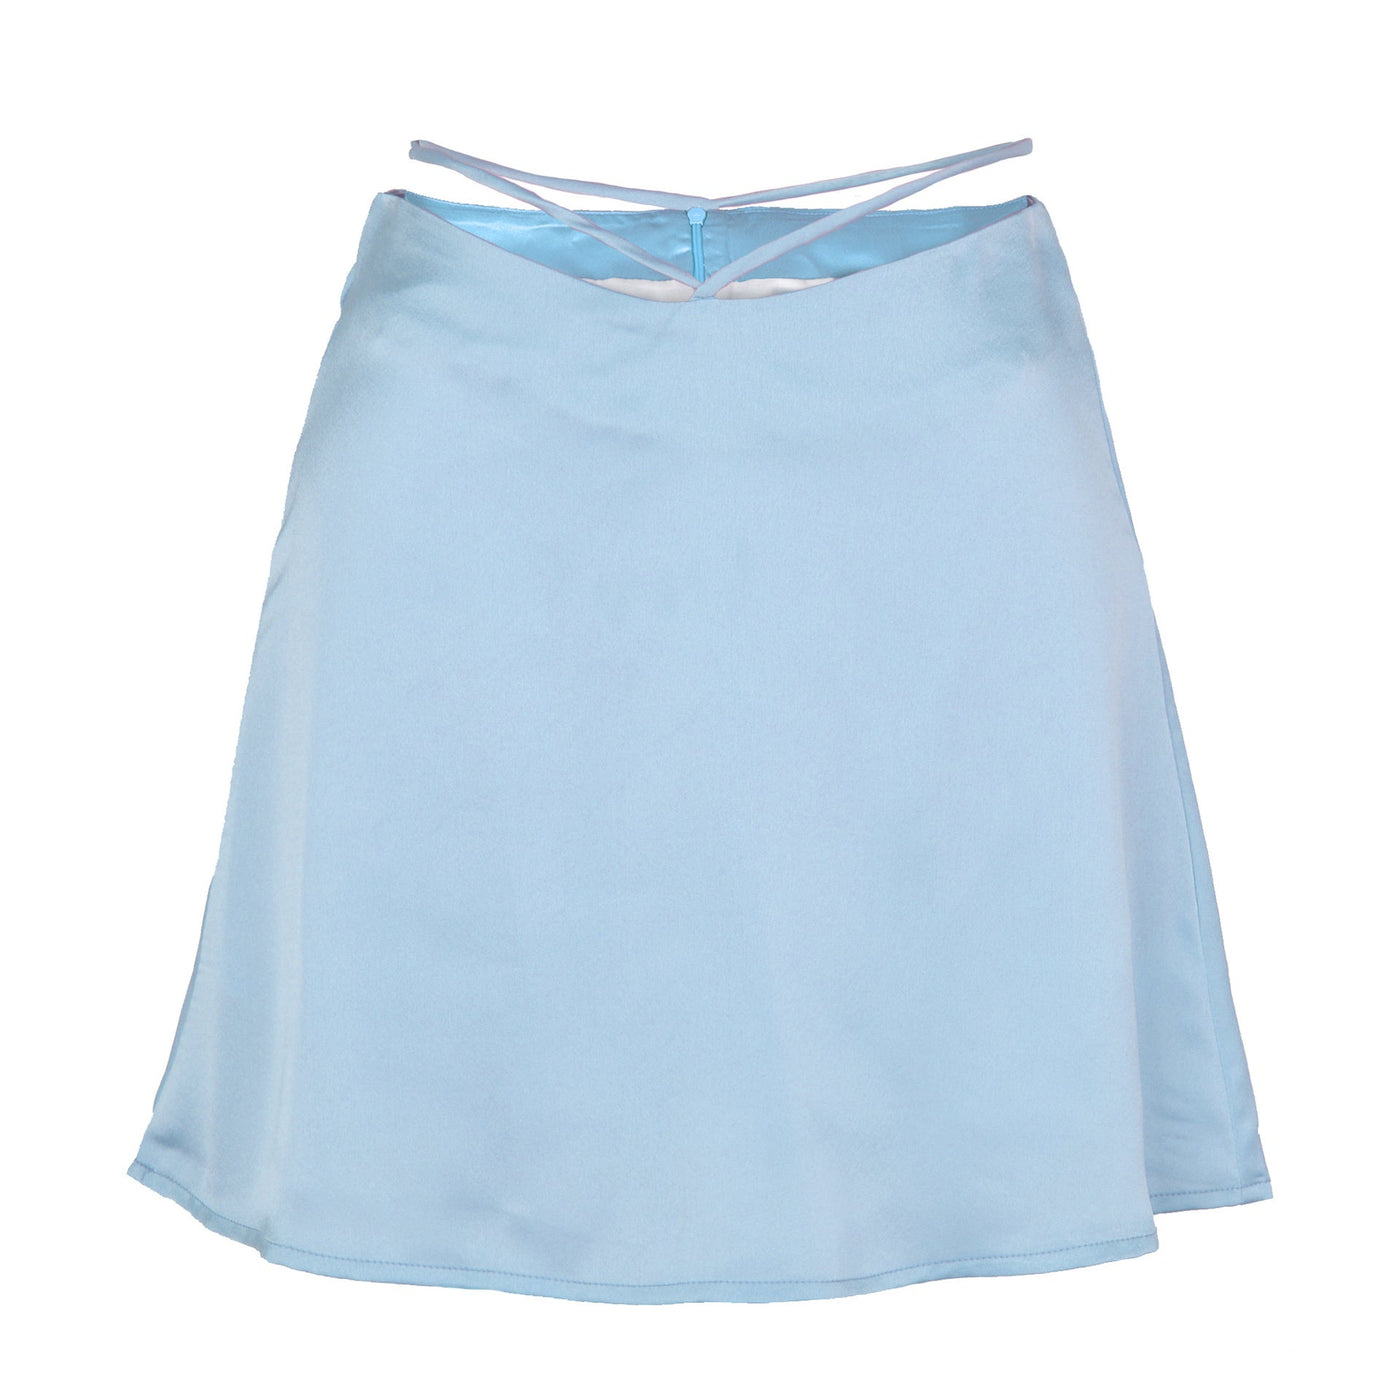 NTG Fad Blue / S New Solid Color Sexy Satin Skirt Fashion Lace Up Zipper High Wait Streetwear Casual Skirts